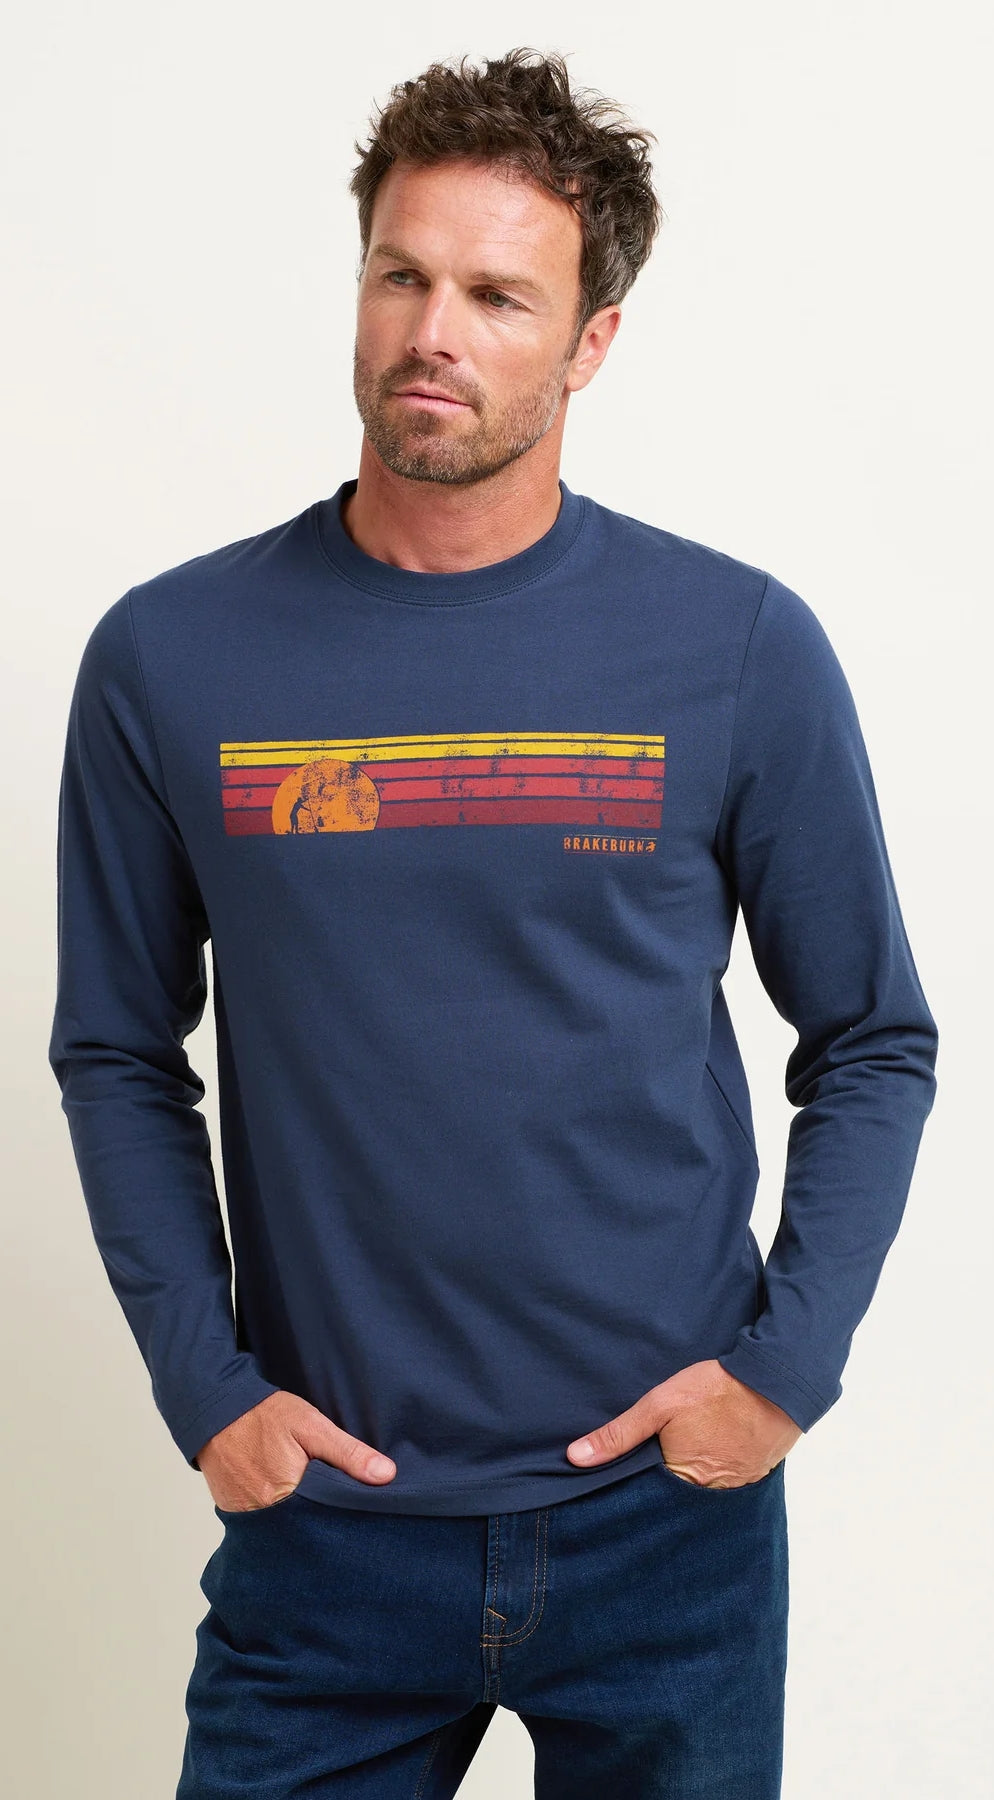 A men's long sleeve tee from Brakeburn in navy featuring distressed style sunset and stripes print across the chest.